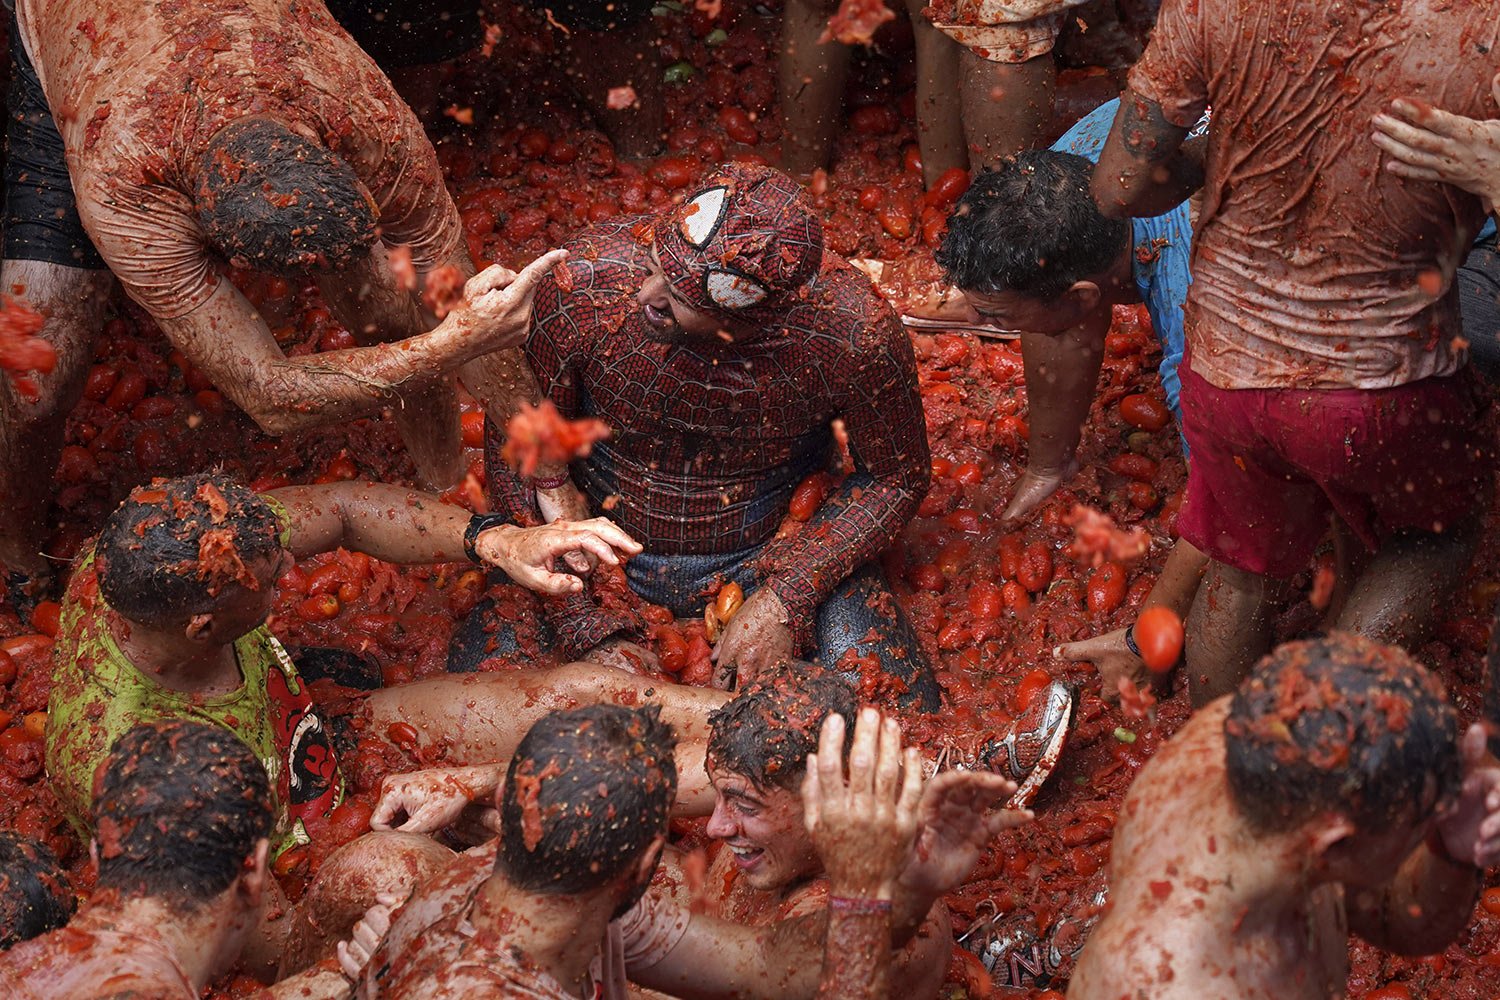  A participant wearing a Spiderman costume sits in a pool of overripe tomatoes and red pulp, during the annual tomato street fight in Bunol, Spain, Wednesday, Aug. 30, 2023. (AP Photo/Alberto Saiz) 